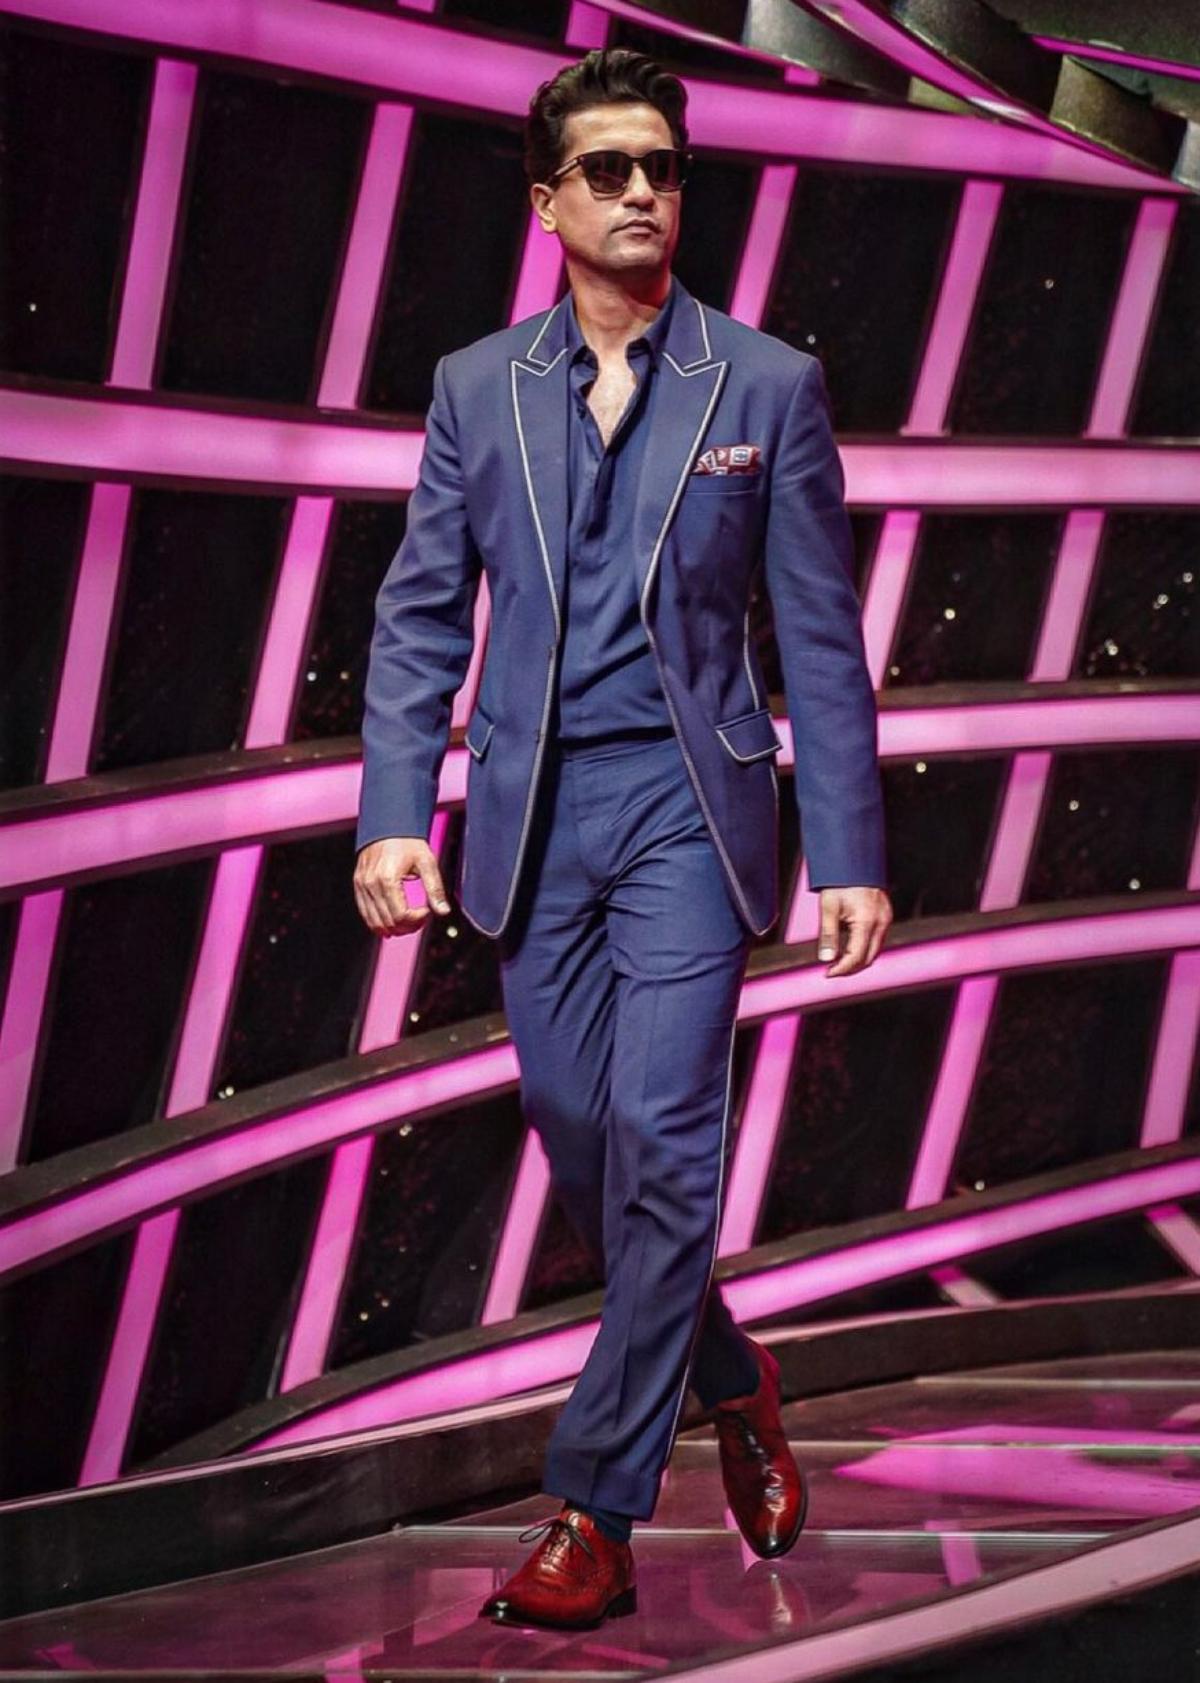 Here is Vicky Kaushal looking all dapper in his dark blue blazer with matching pants. The white outline on the lapels and pockets of the blazer, along with the sides of his bottoms, gave a playful touch to his otherwise formal attire. To complete the look, Vicky chose brown leather shoes. With black sunglasses on, Mr. Kaushal simply slayed all the way with his chic blue ensemble. P.S. We can't get our eyes off his chiselled and clean-shaved face, what about you?   